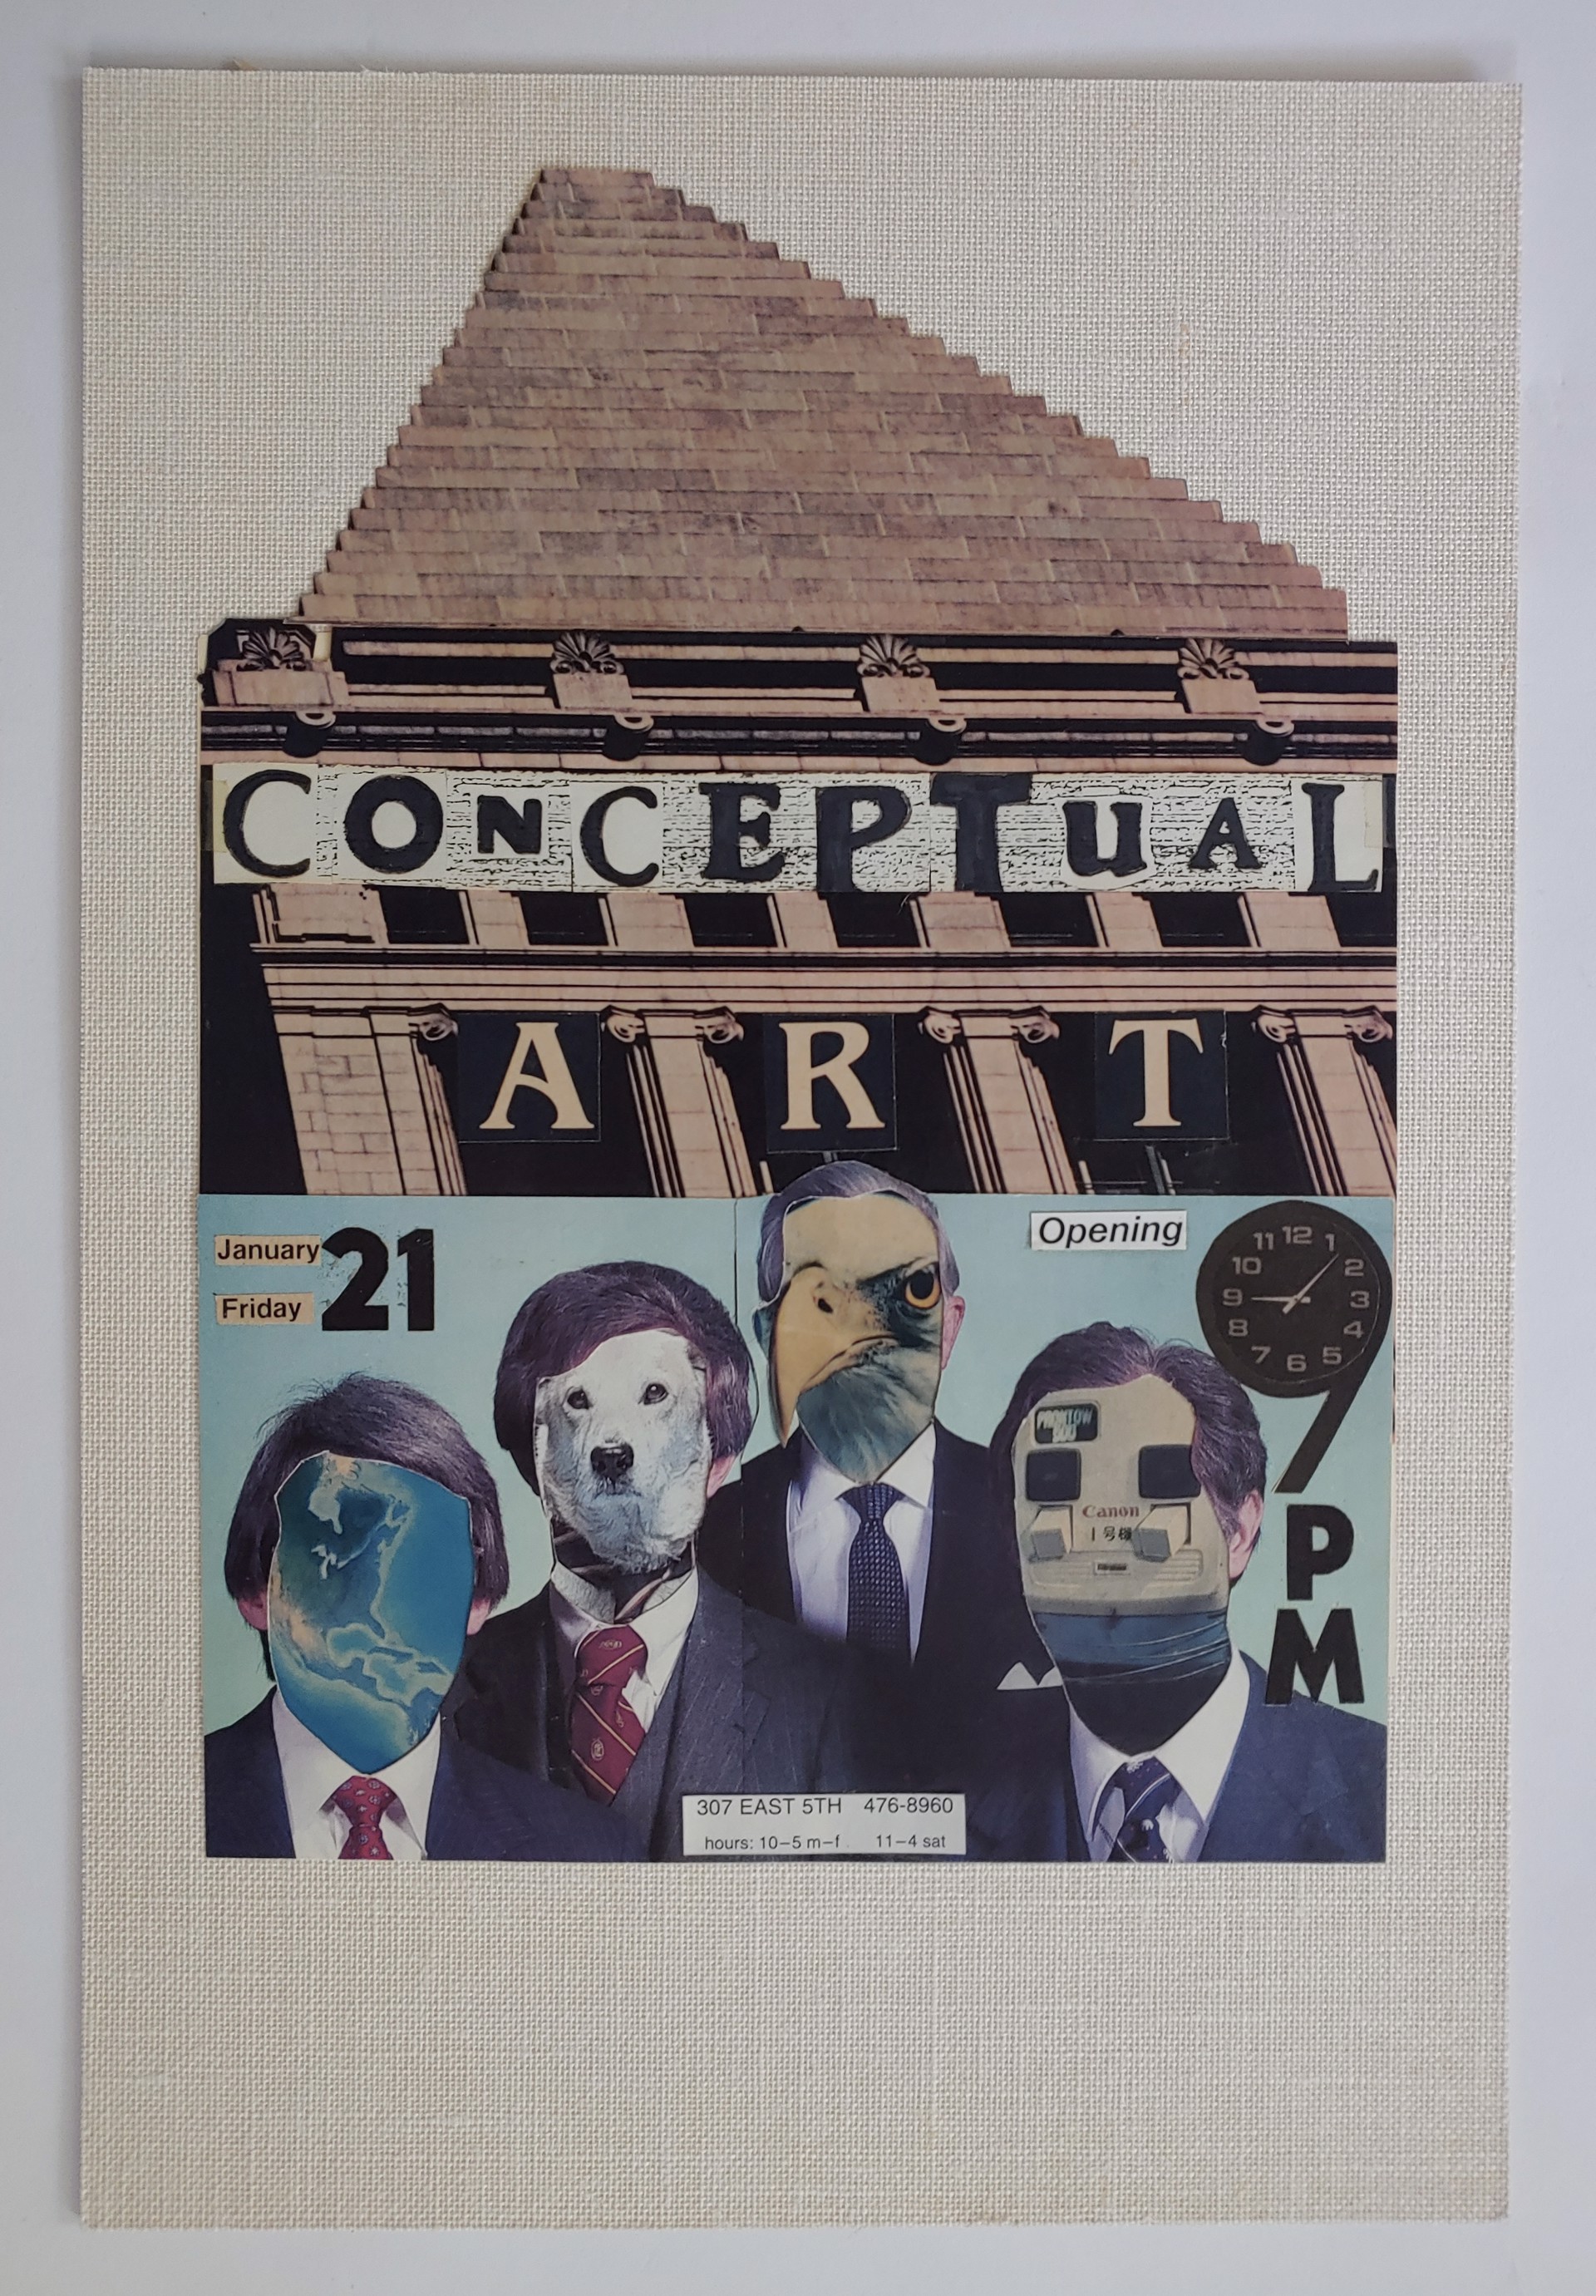 "Conceptual Art" Collage - Ad for exhibit, Poster by David Amdur